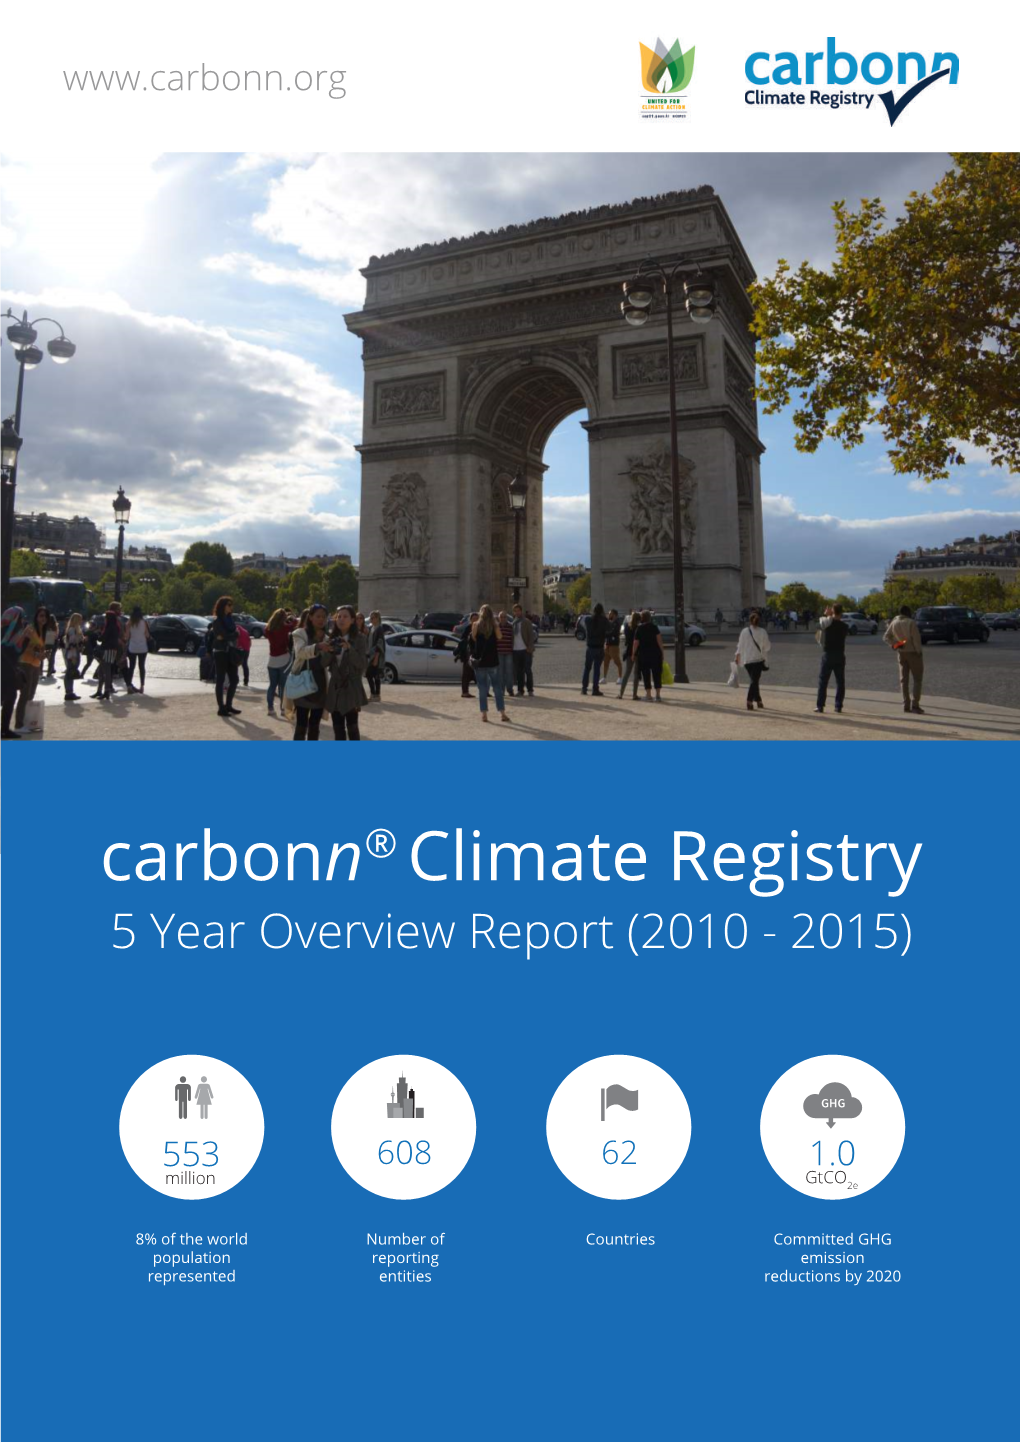 Carbonn Climate Registry 5 Year Overview Report (2010-2015)